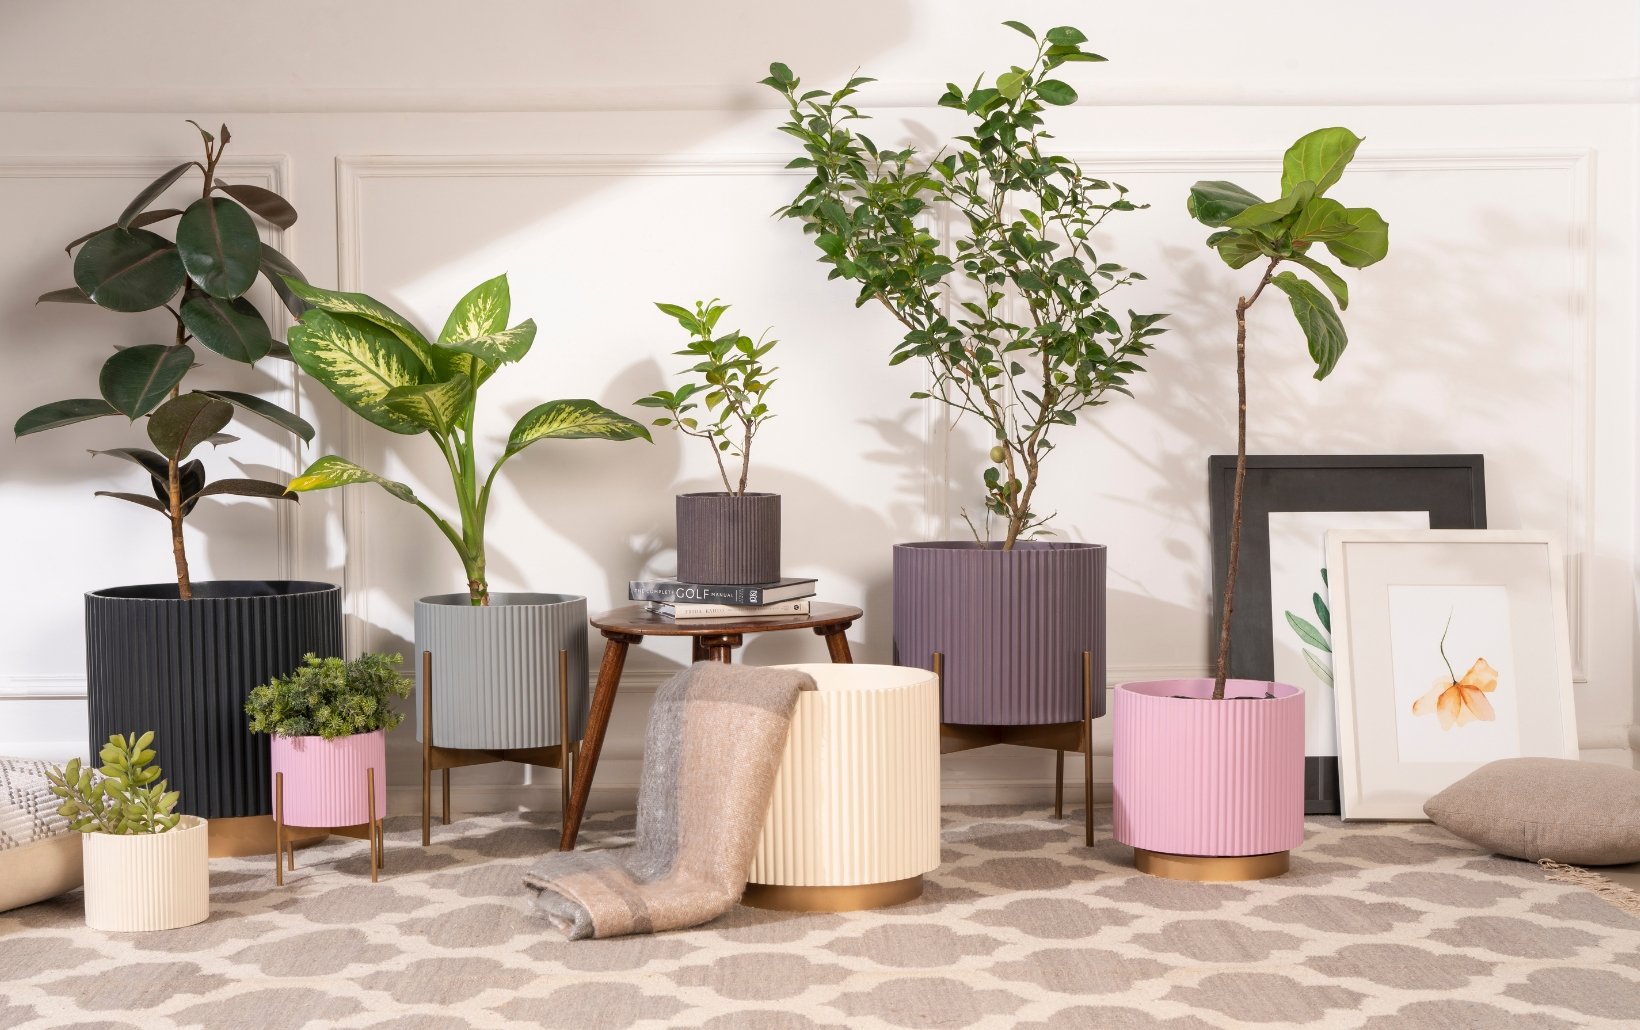 5 Statement Plants to Add Drama to any Room - Ripples Home